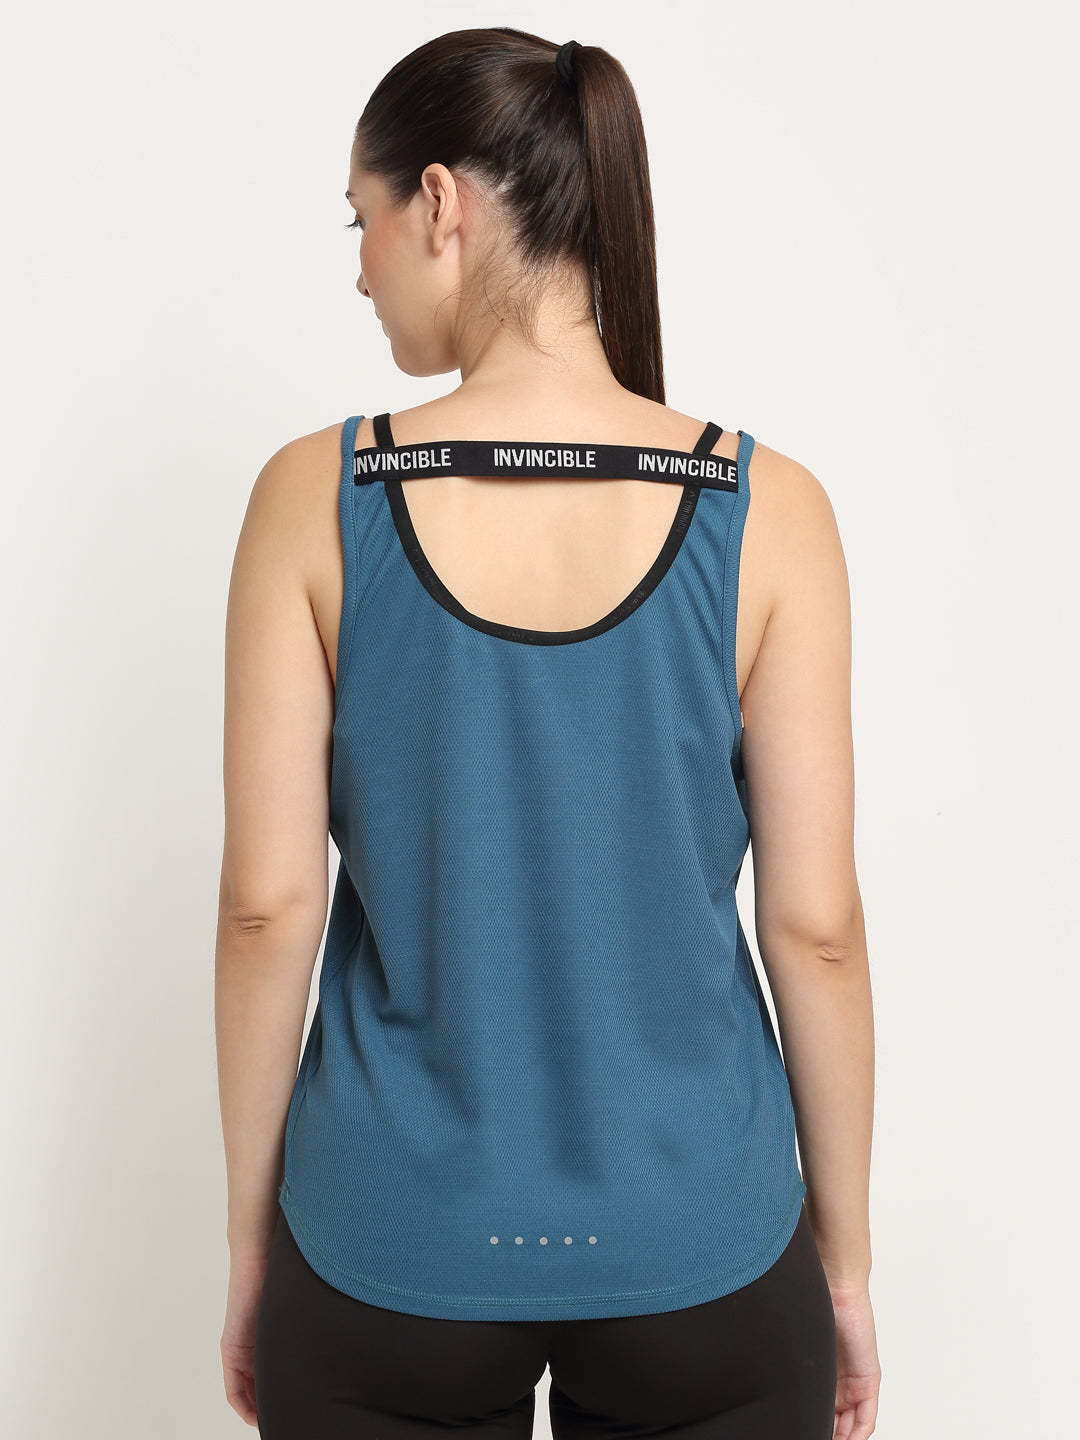 INCHDOWN Racerback Tank Top for Women, Girls I Compression